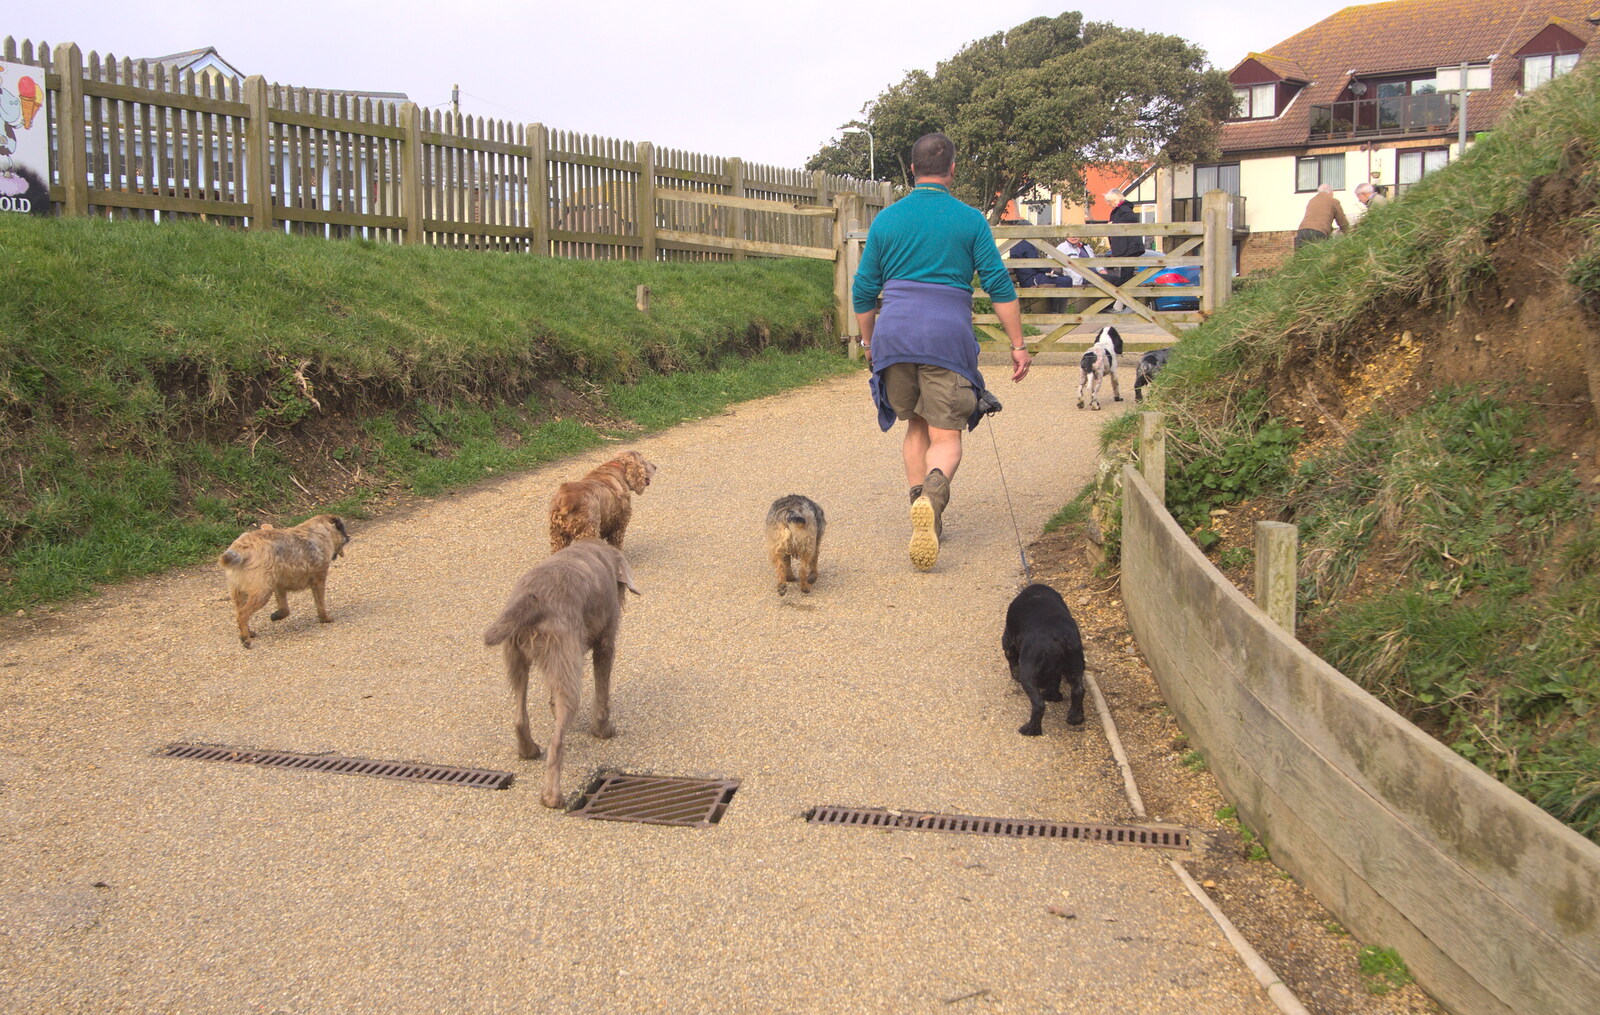 A dog walkers with a string of hounds in tow from Barton on Sea Beach, and a Trip to Christchurch, Hampshire and Dorset - 19th March 2013